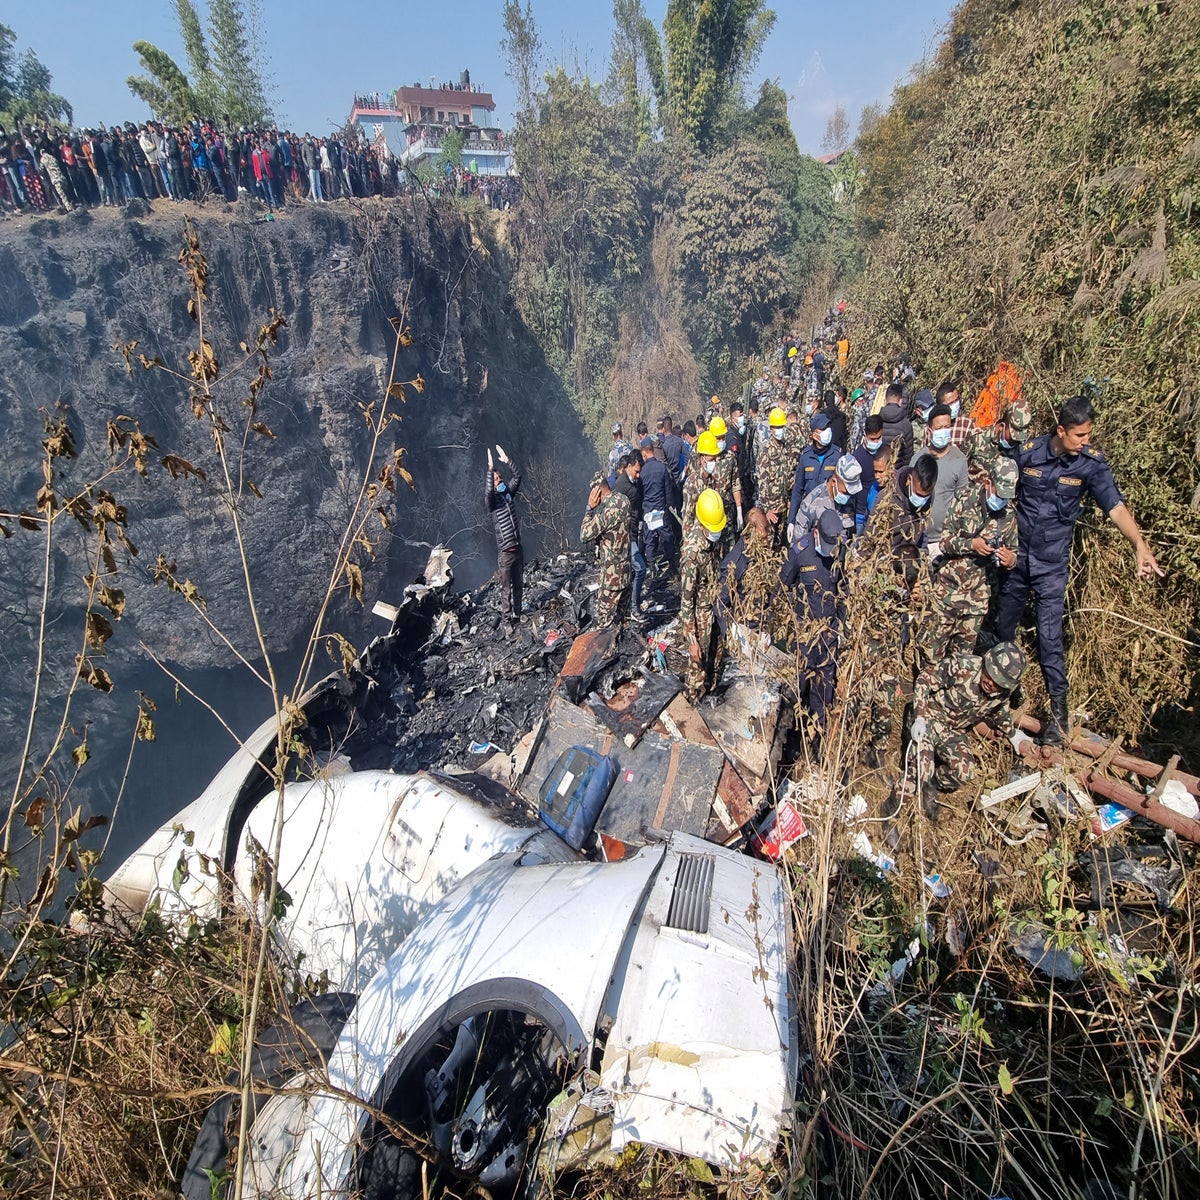 Nepal Garden Sex Videos - Video shows final moments of Nepal flight before plane crashed killing 68  people | The Independent